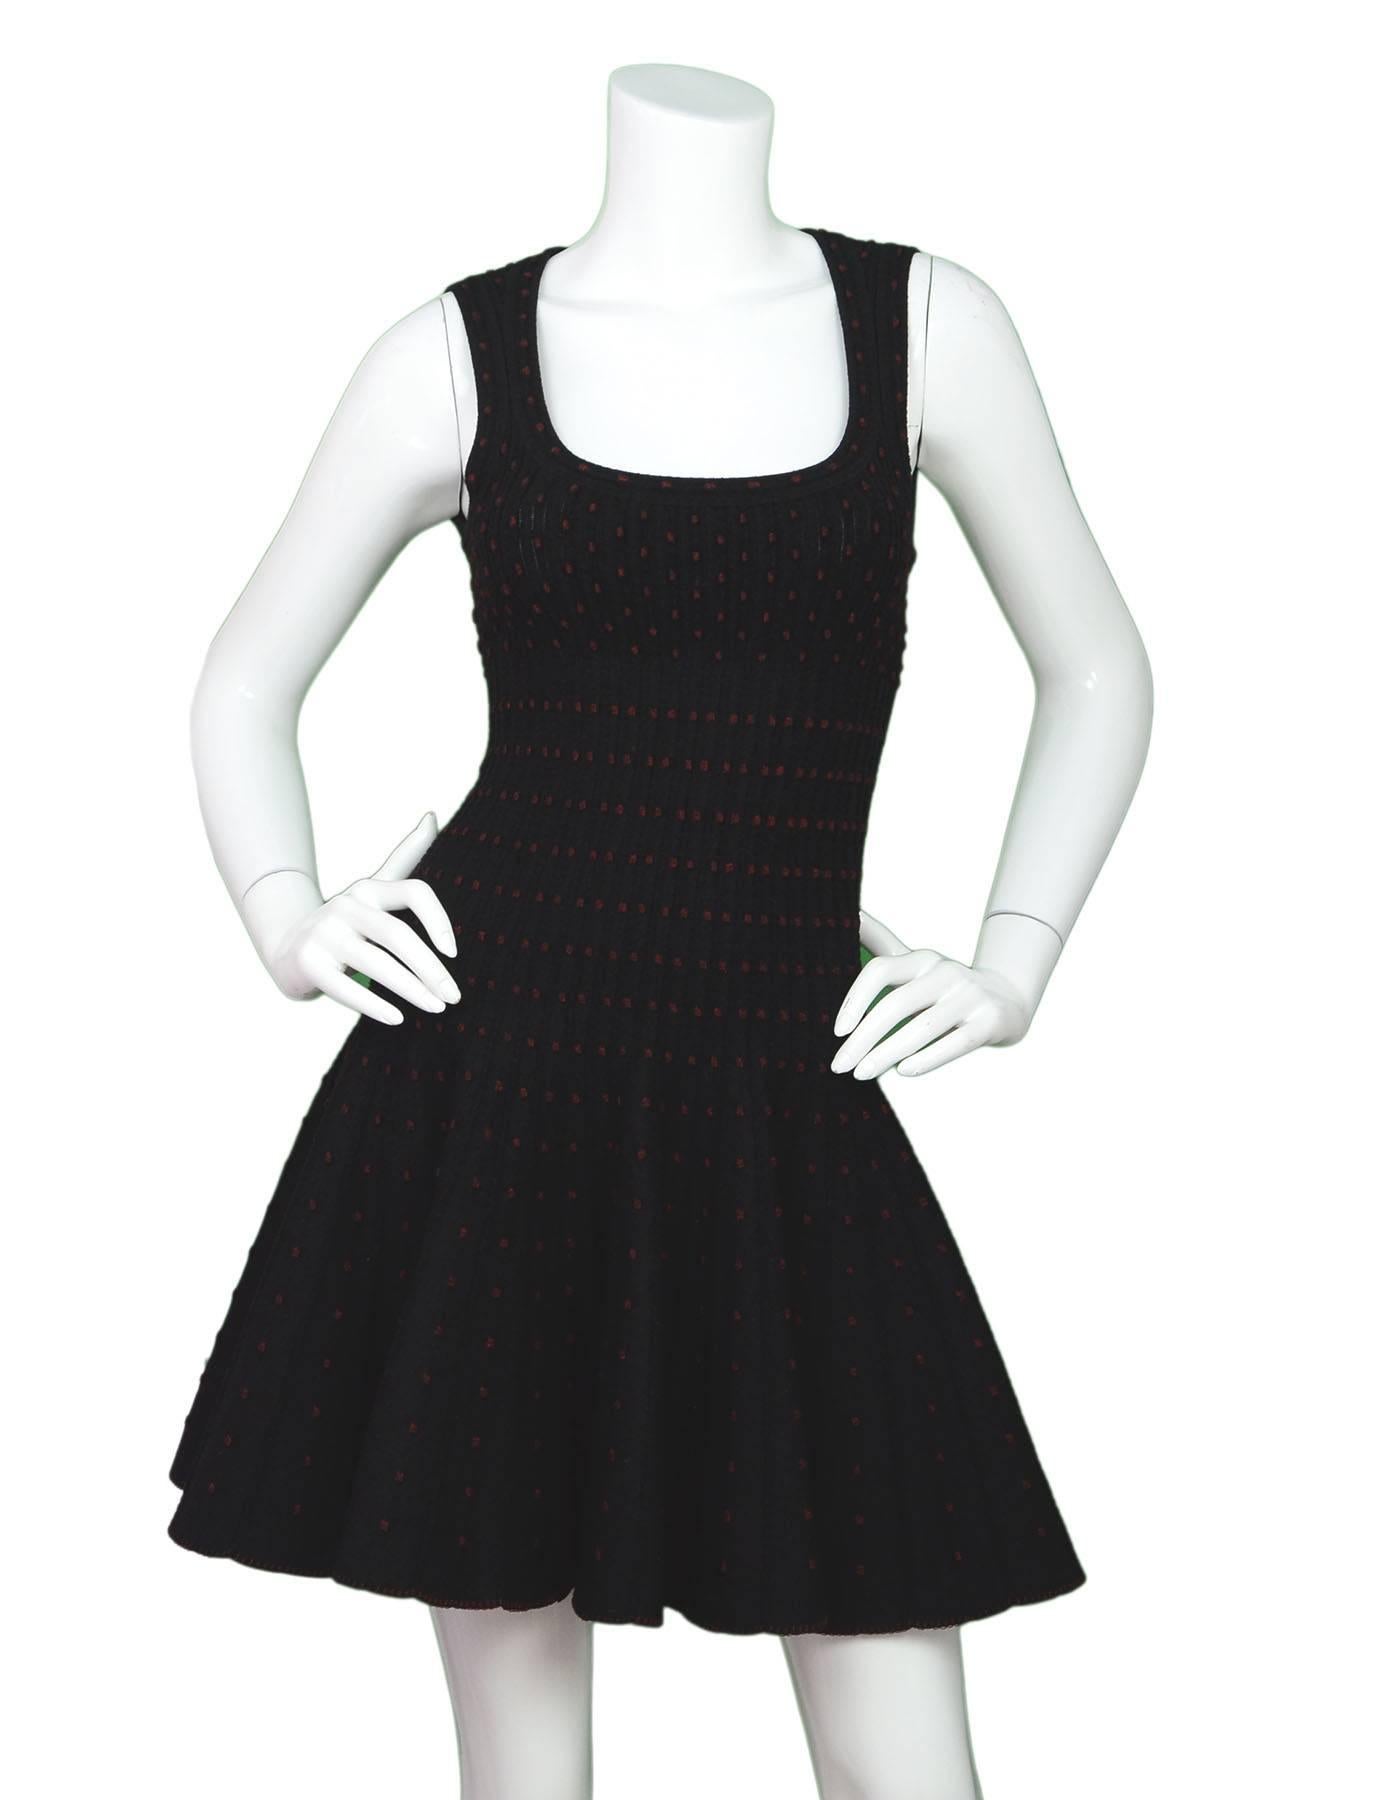 Alaia Black & Red Polka Dot Fit & Flare Dress Sz FR36

Features scoop neck and sparkling polka dots throughout

Made in: Italy
Color: Black, red
Composition: 50% wool, 25% viscose, 15% nylon, 10% polyester
Lining: None
Closure/opening: Back center